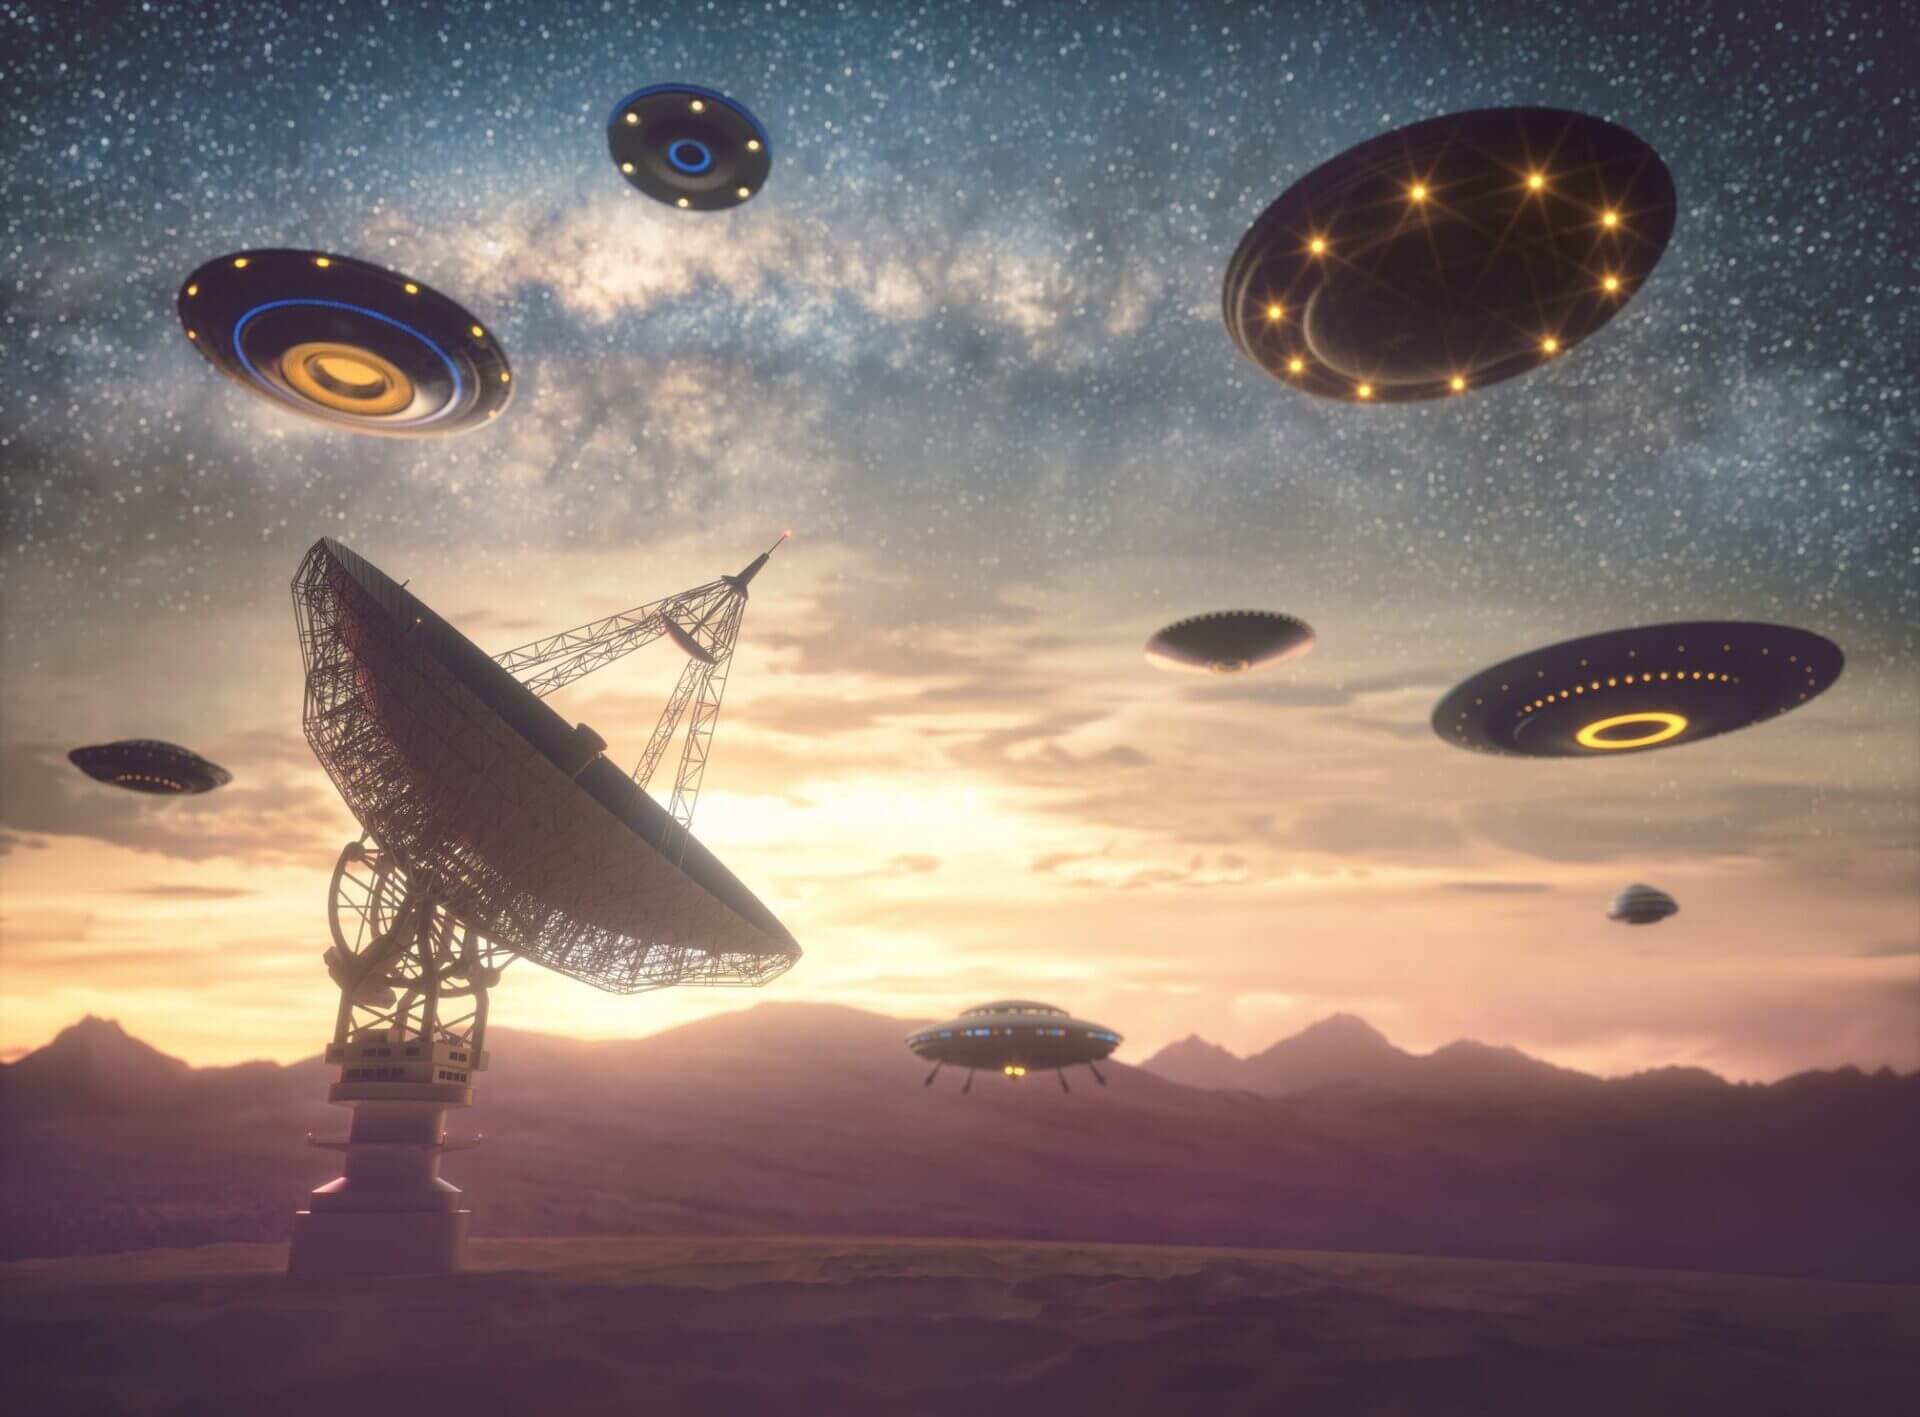 Astrophysicist Warns: “Aliens Plan An Invasion of Earth”